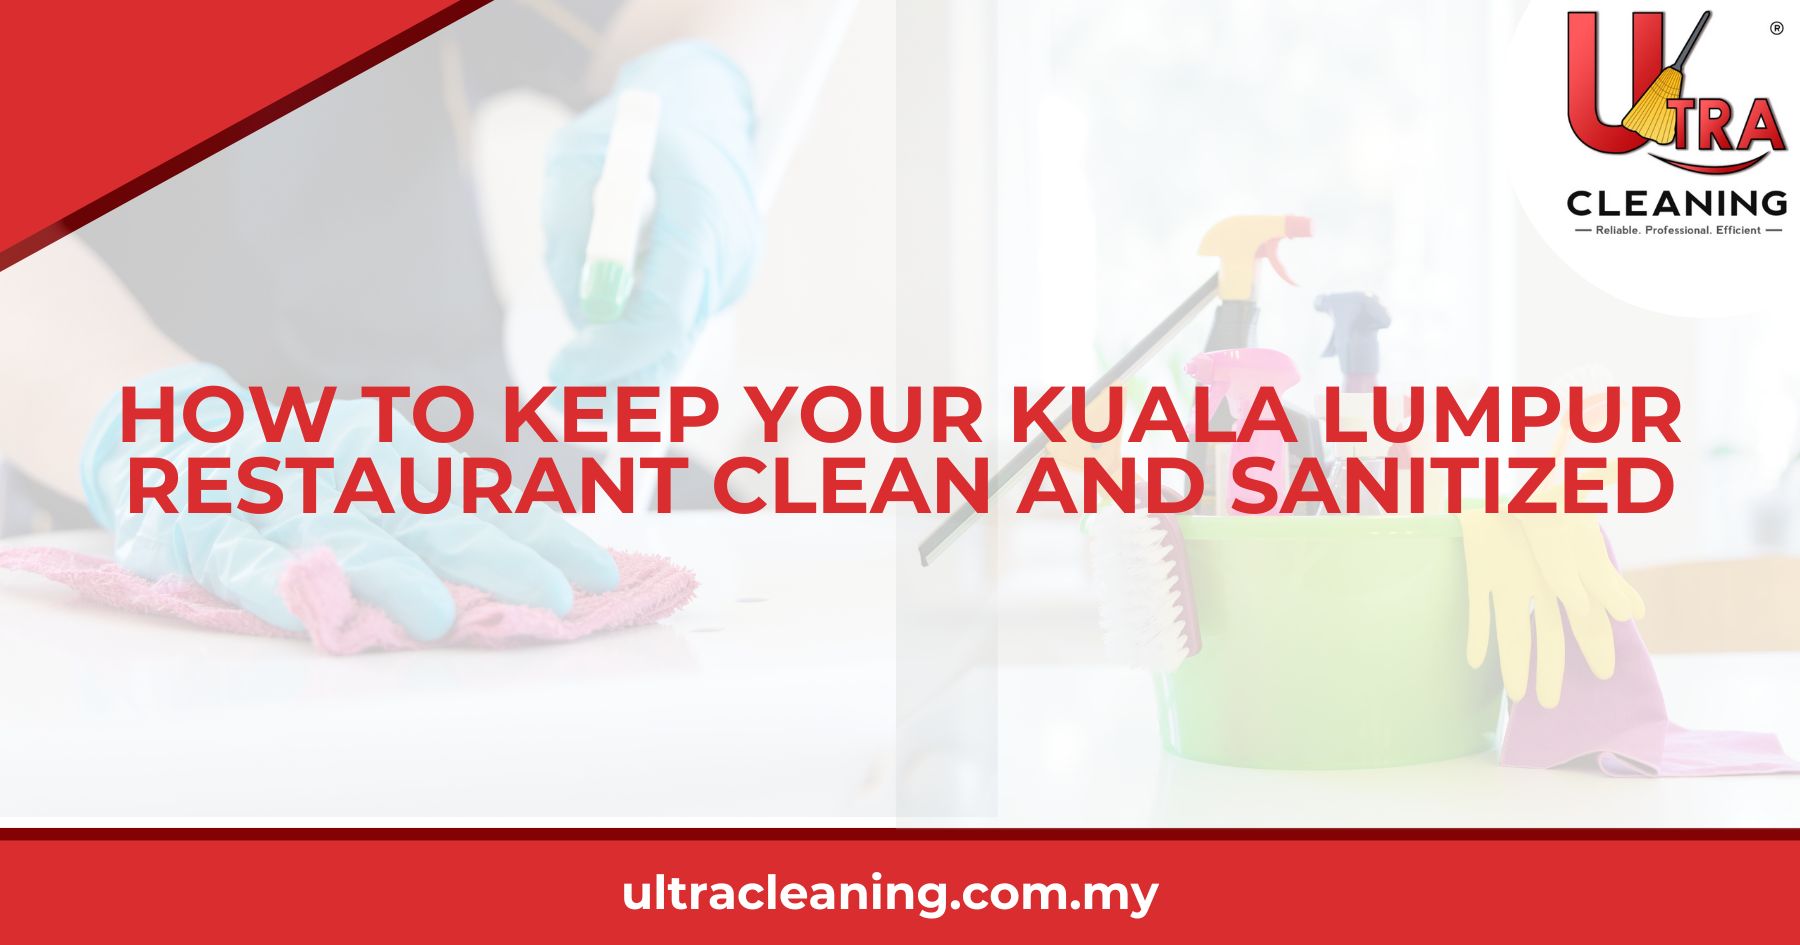 How to Keep Your Kuala Lumpur Restaurant Clean and Sanitized